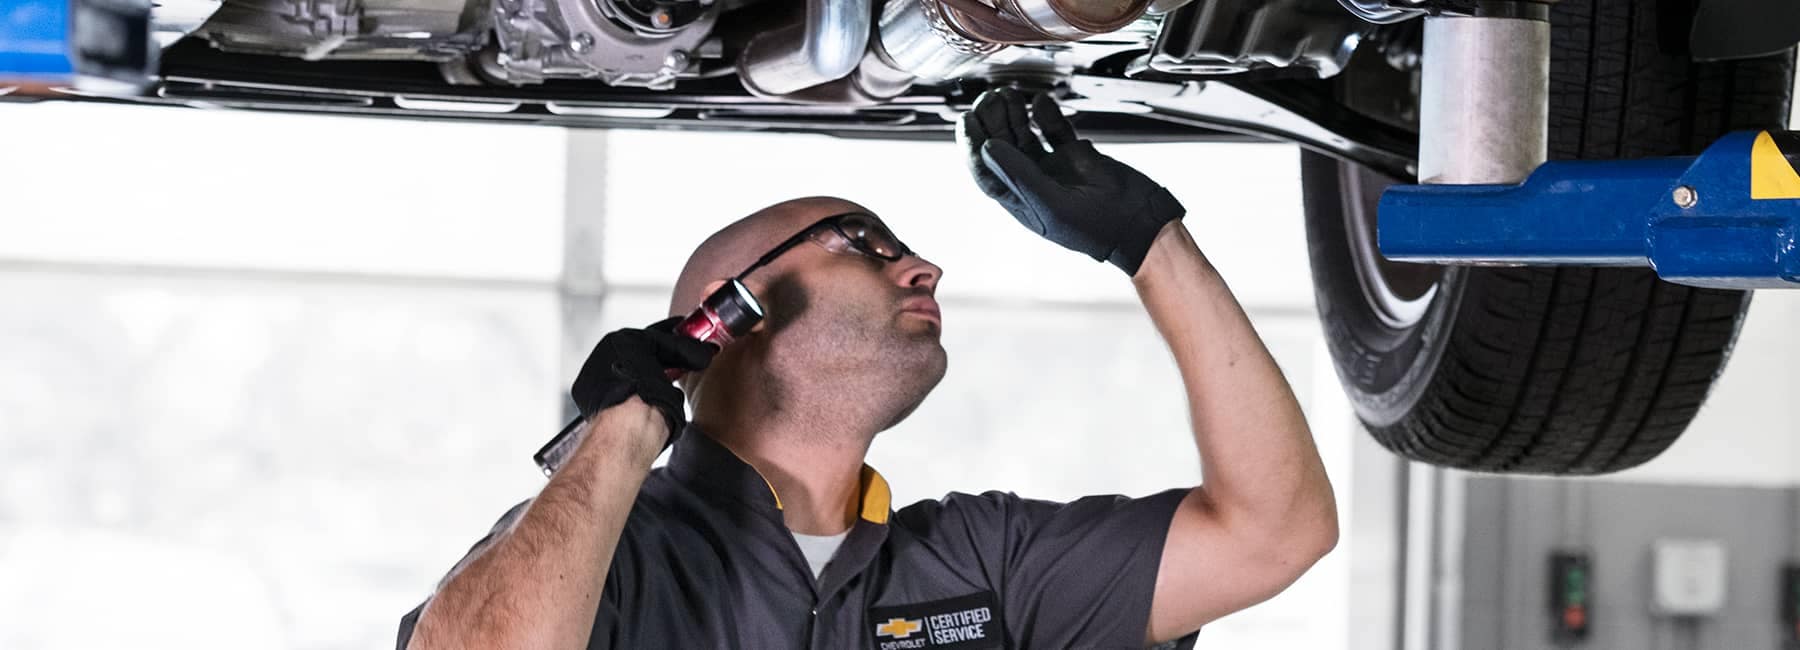 Chevrolet service technician looking at underside of a raised car